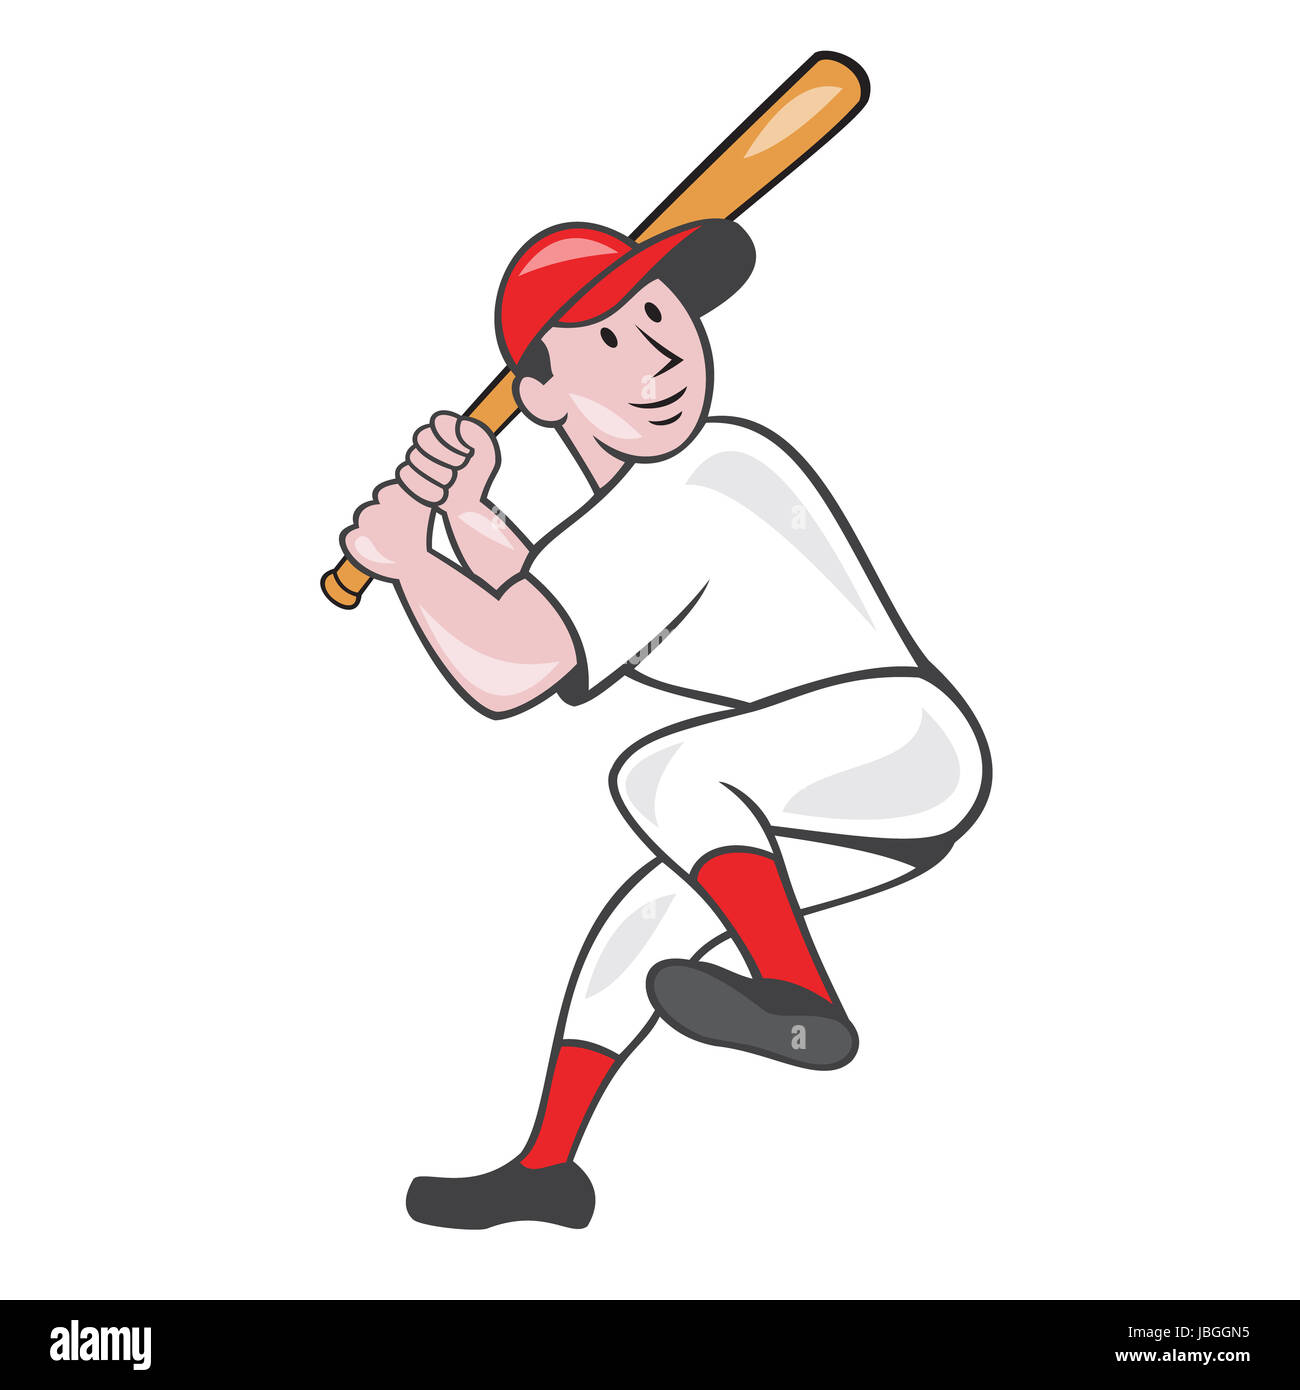 Illustration of an american baseball player batter hitter batting with one leg up done in cartoon style isolated on white background. Stock Photo